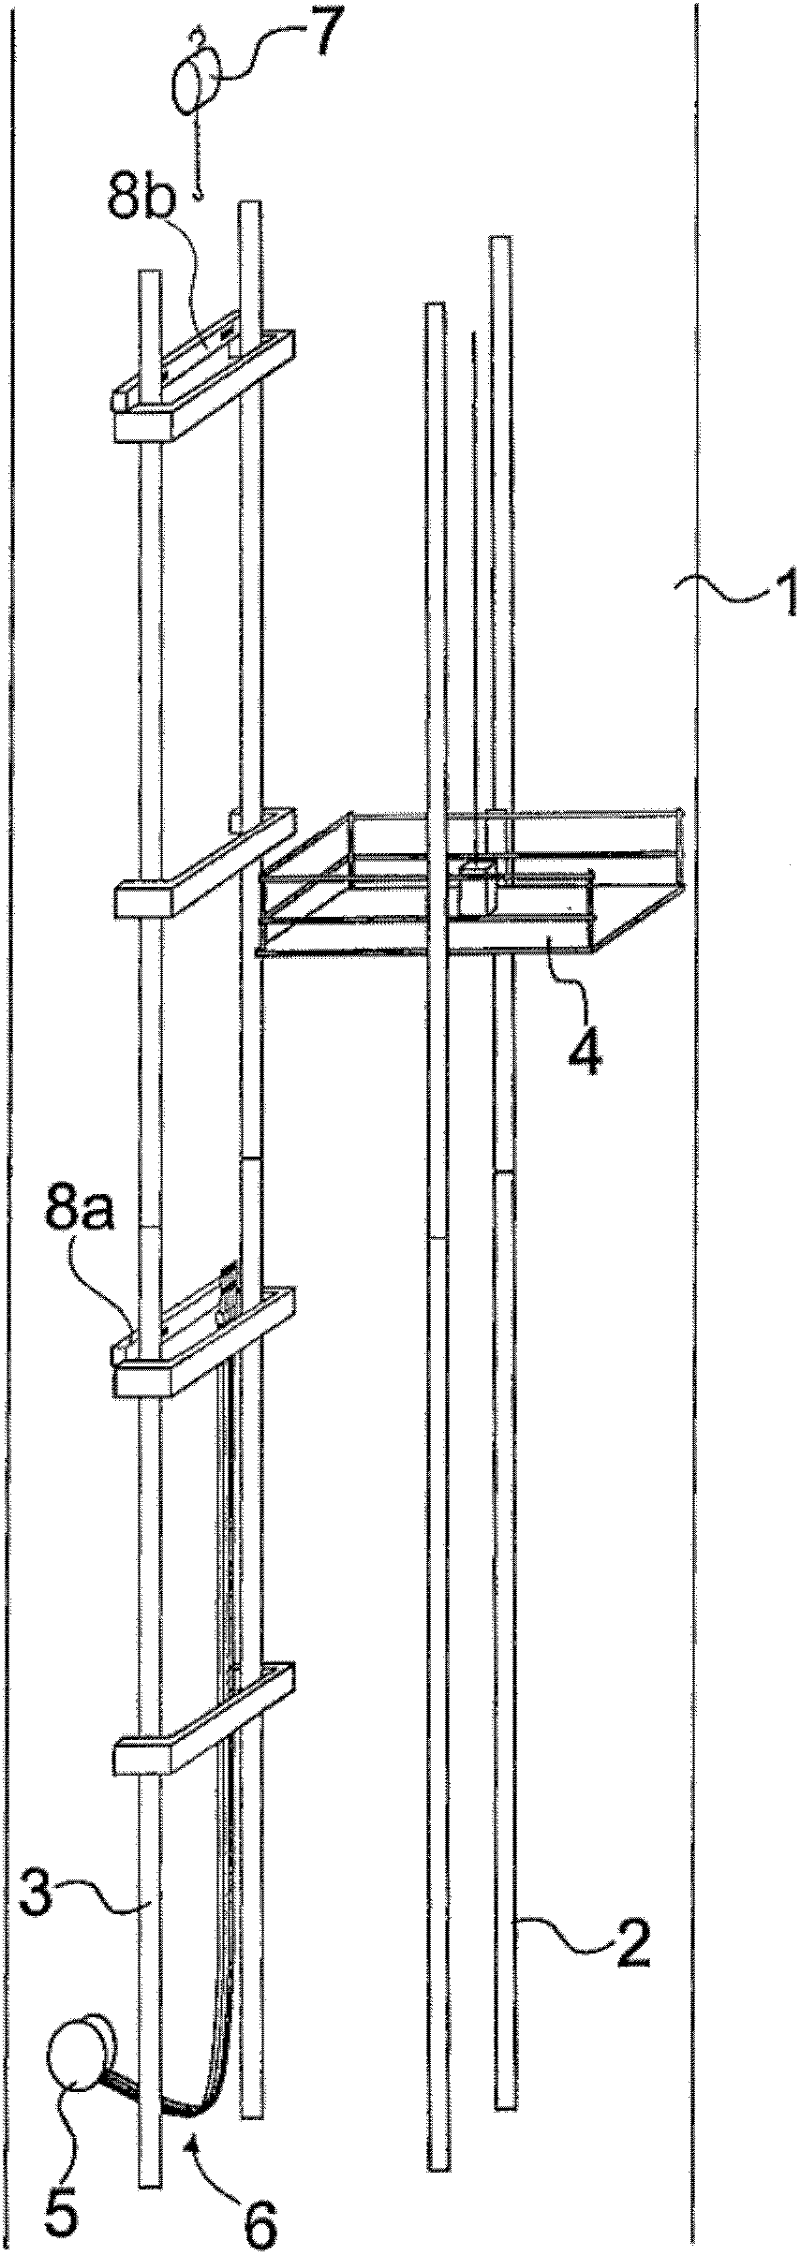 Method for installing the hoisting roping of an elevator